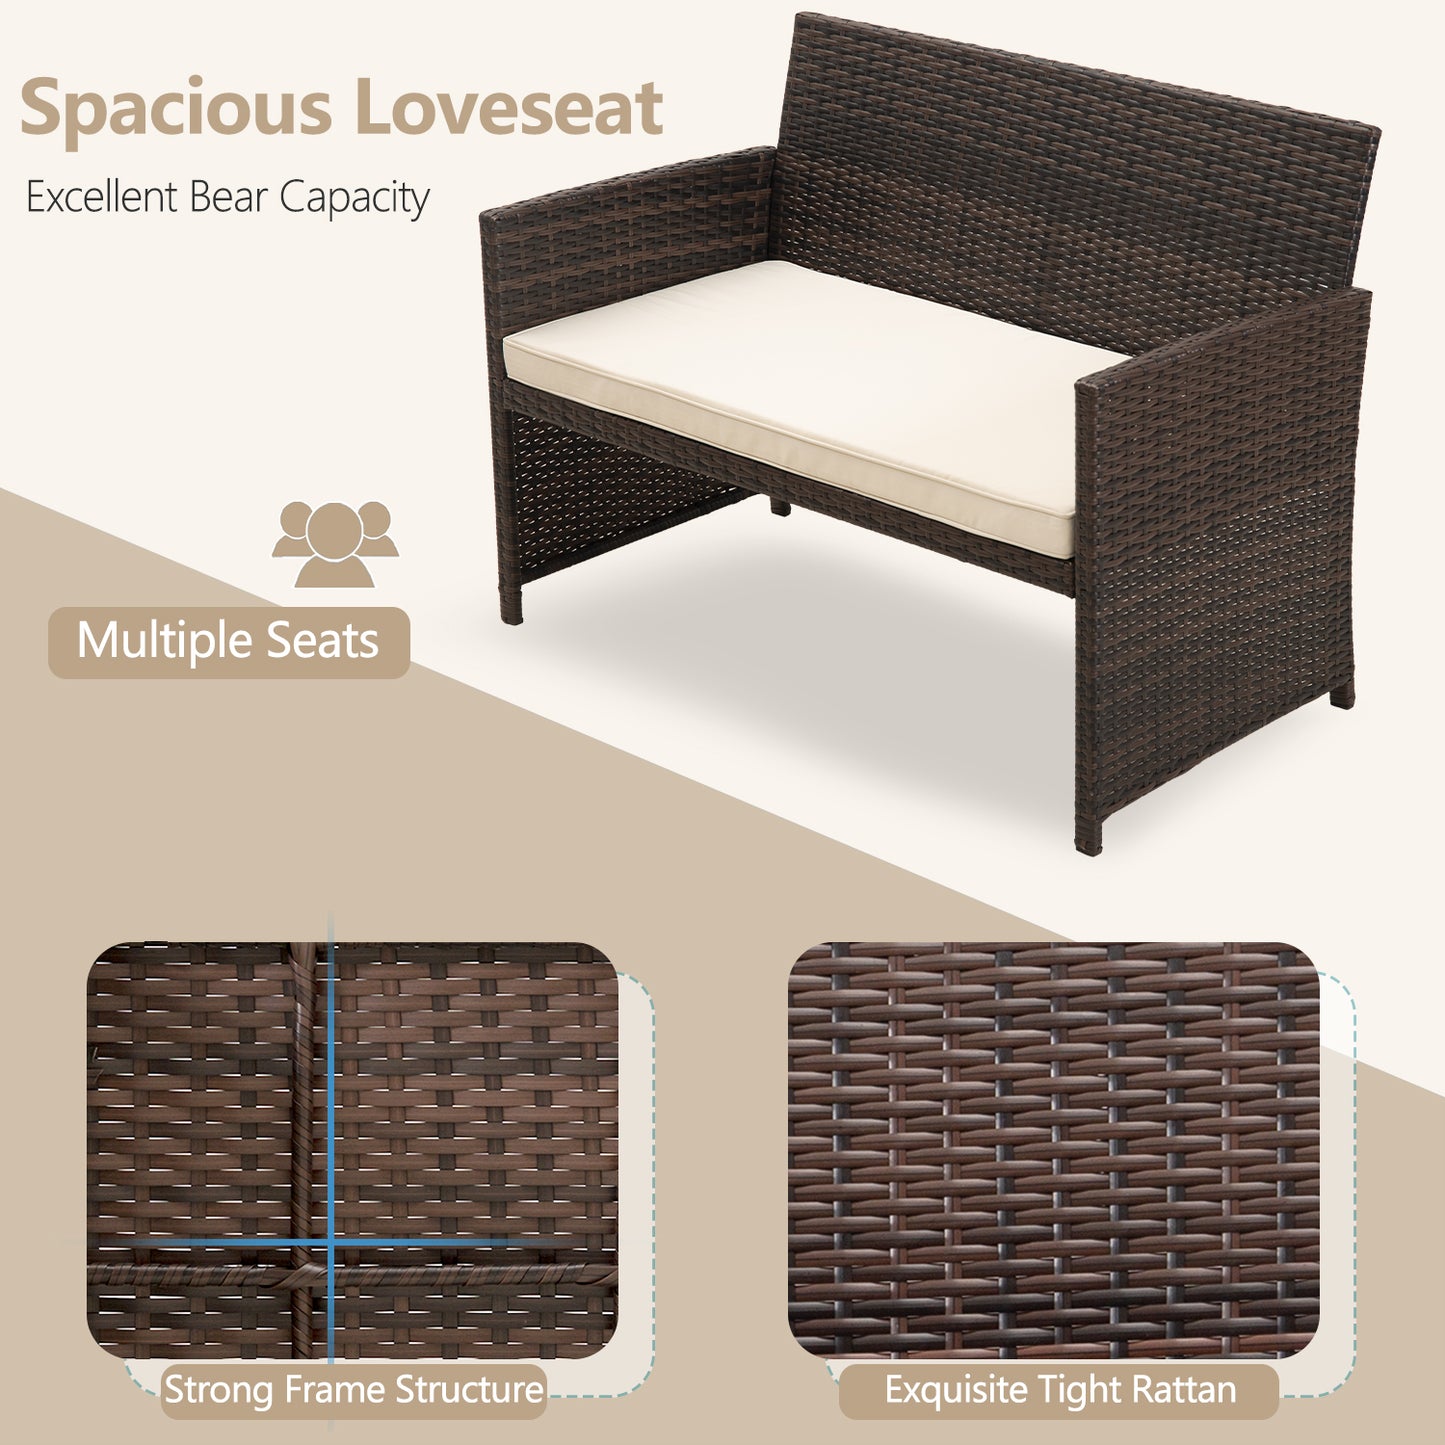 Cpintltr 4 Pieces Outdoor Wicker Furniture Sets